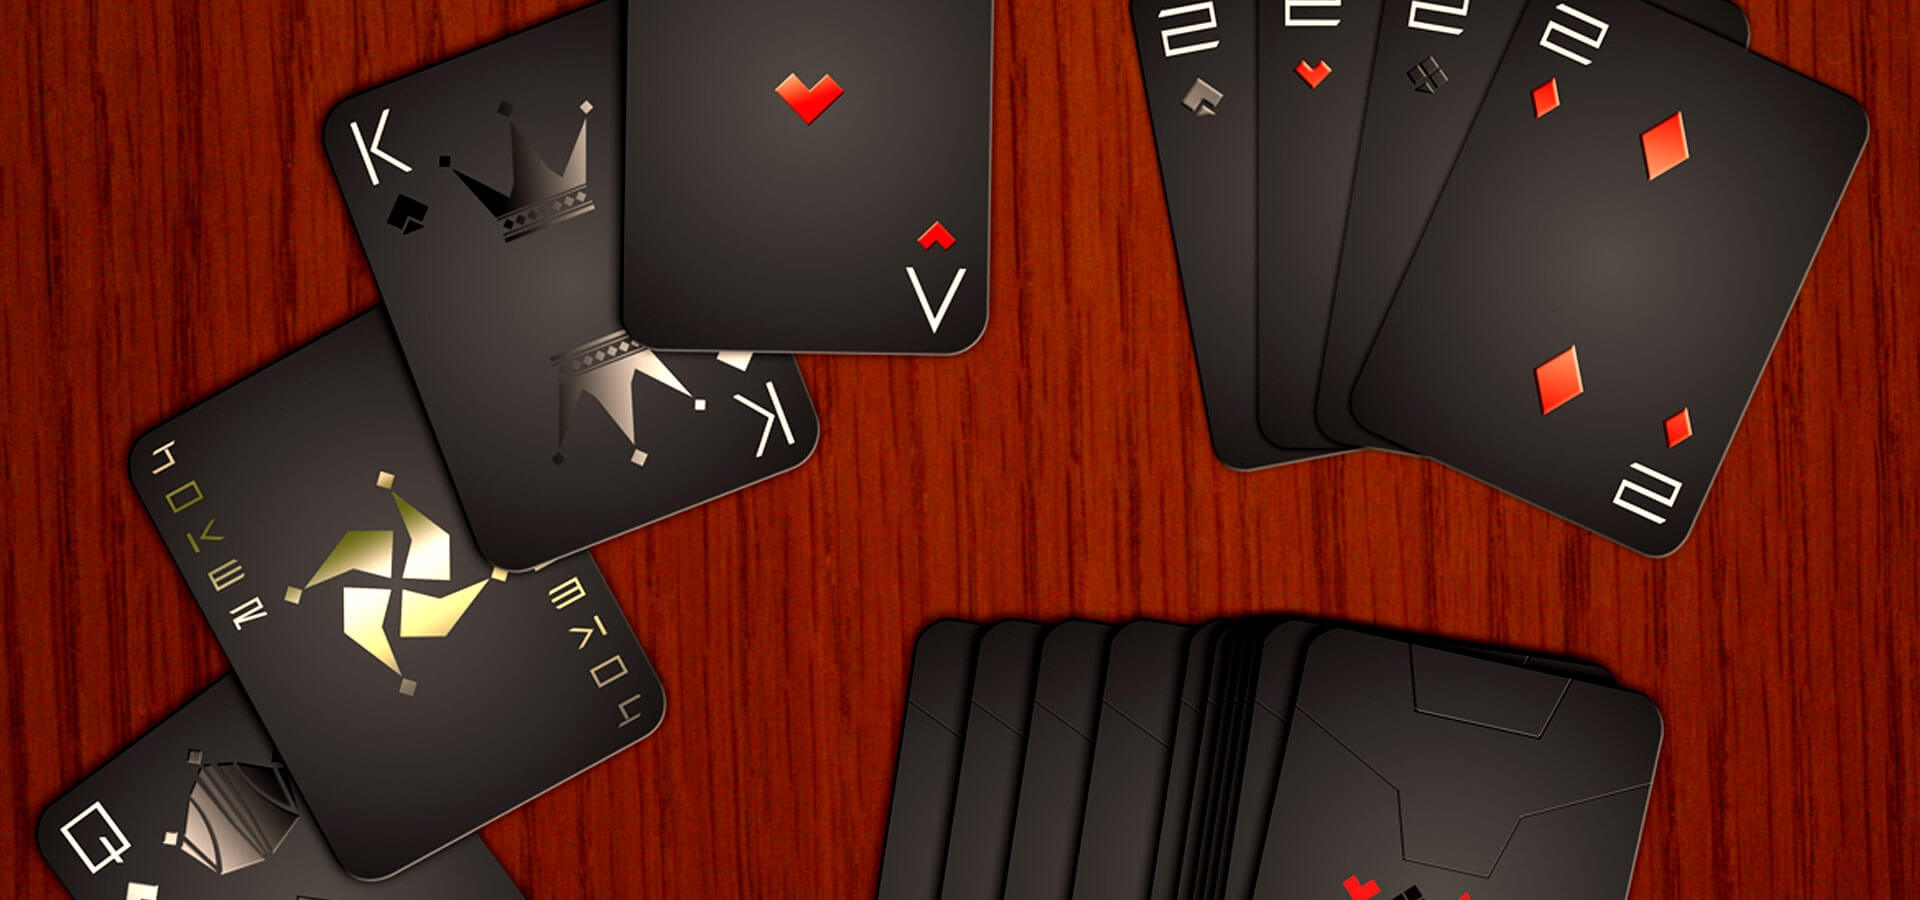 22+ Playing Card Designs | Free & Premium Templates Within Playing Card Template Illustrator